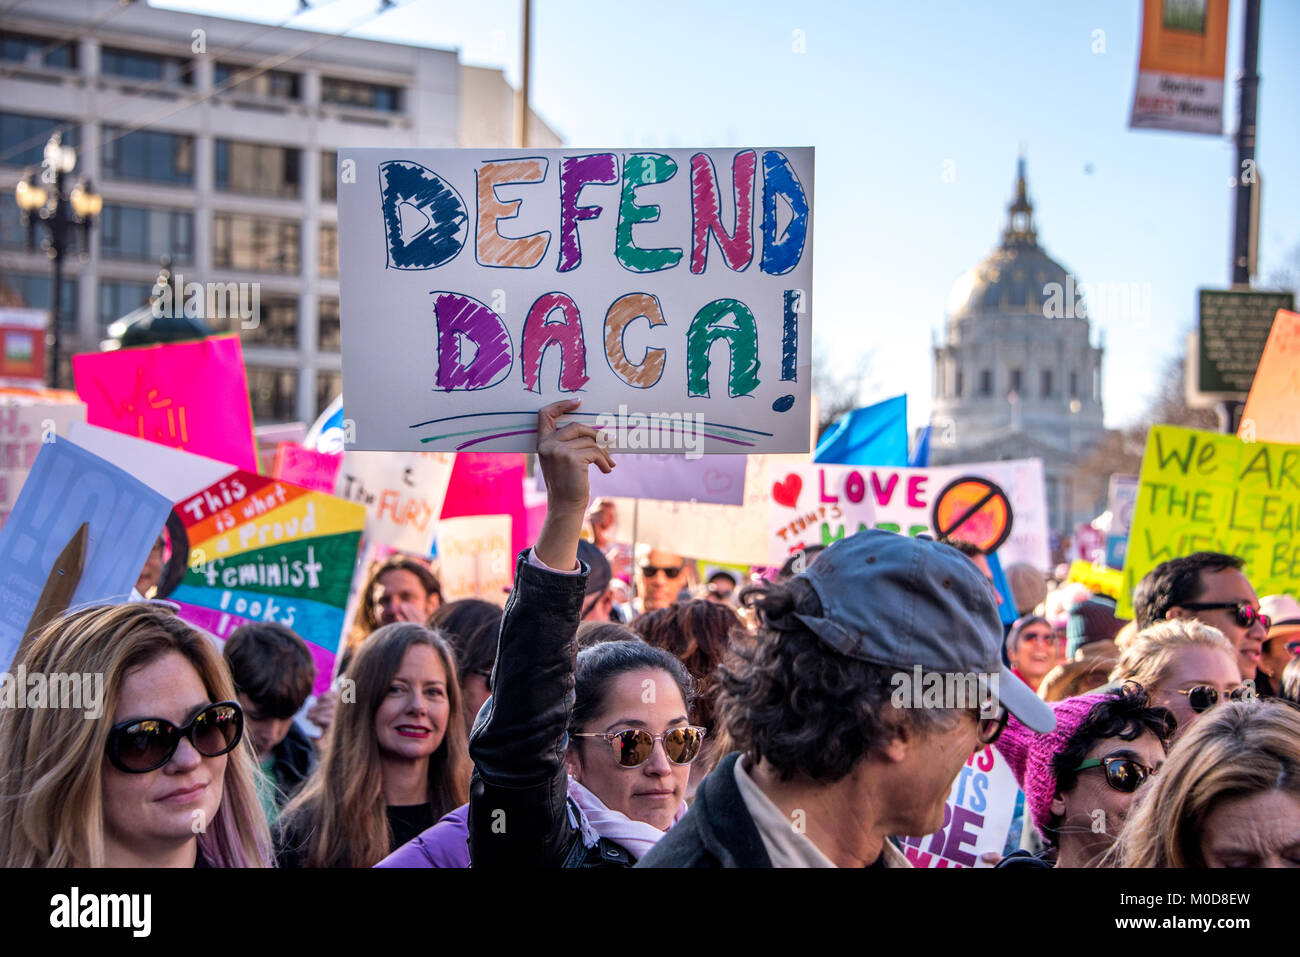 San Francisco, California, USA. 20th January, 2018. The 2018 Women's March in San Francisco, organized by Women's March Bay Area. As the crowd marches down Market Street with City Hall in the background, a woman holds a sign high reading, 'Defend Daca!' Stock Photo